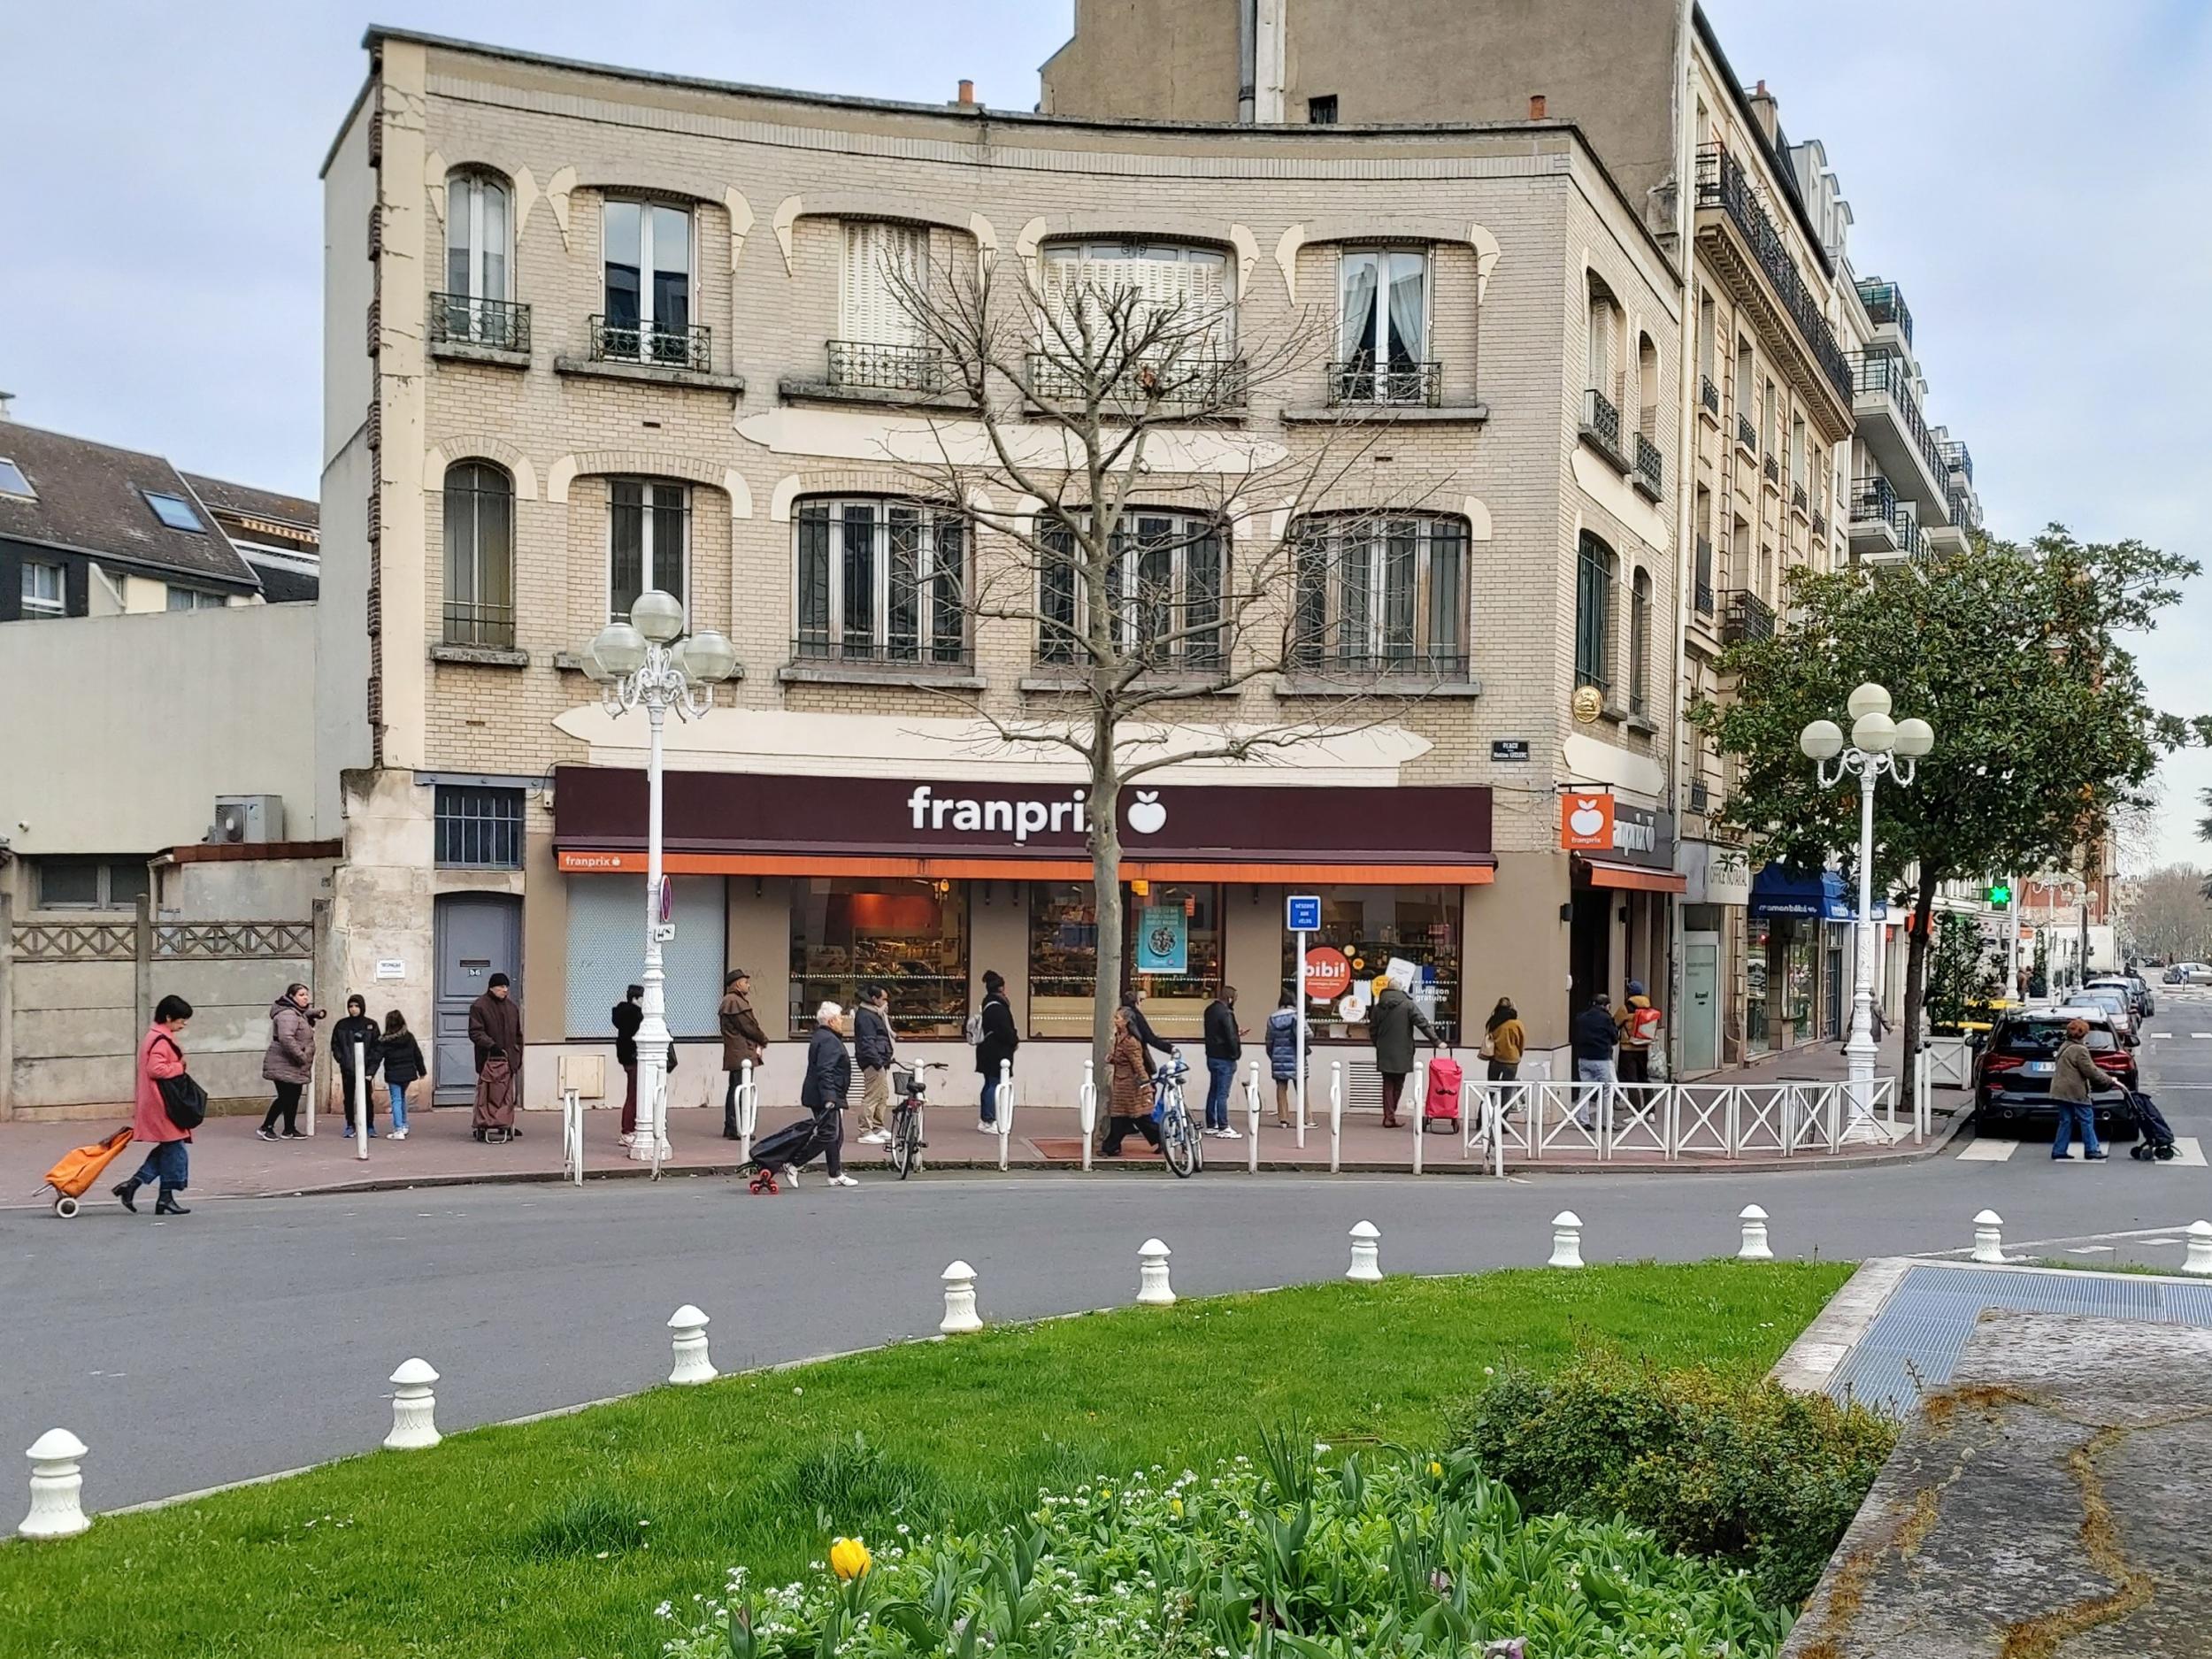 People queue to buy supplies at a convenience store in Montrouge, France, ahead of a lockdown to prevent the spread of coronavirus, 17 March, 2020